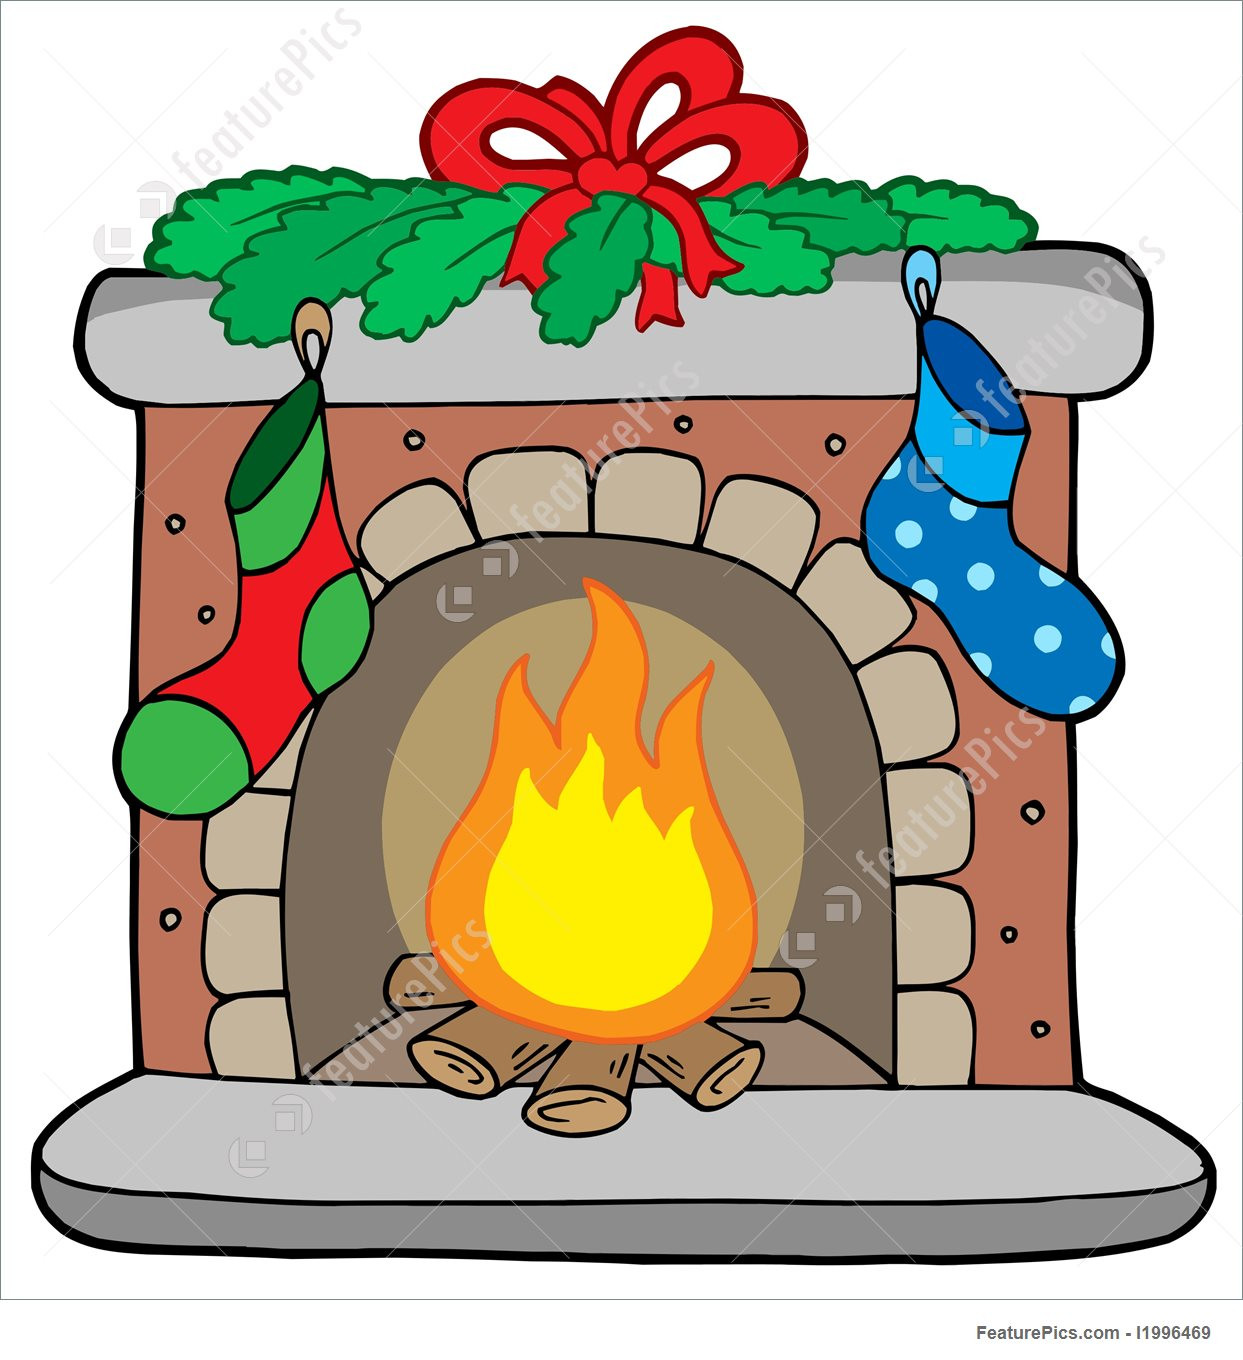 Christmas Fireplace Drawings
 Illustration Christmas Fireplace With Stockings